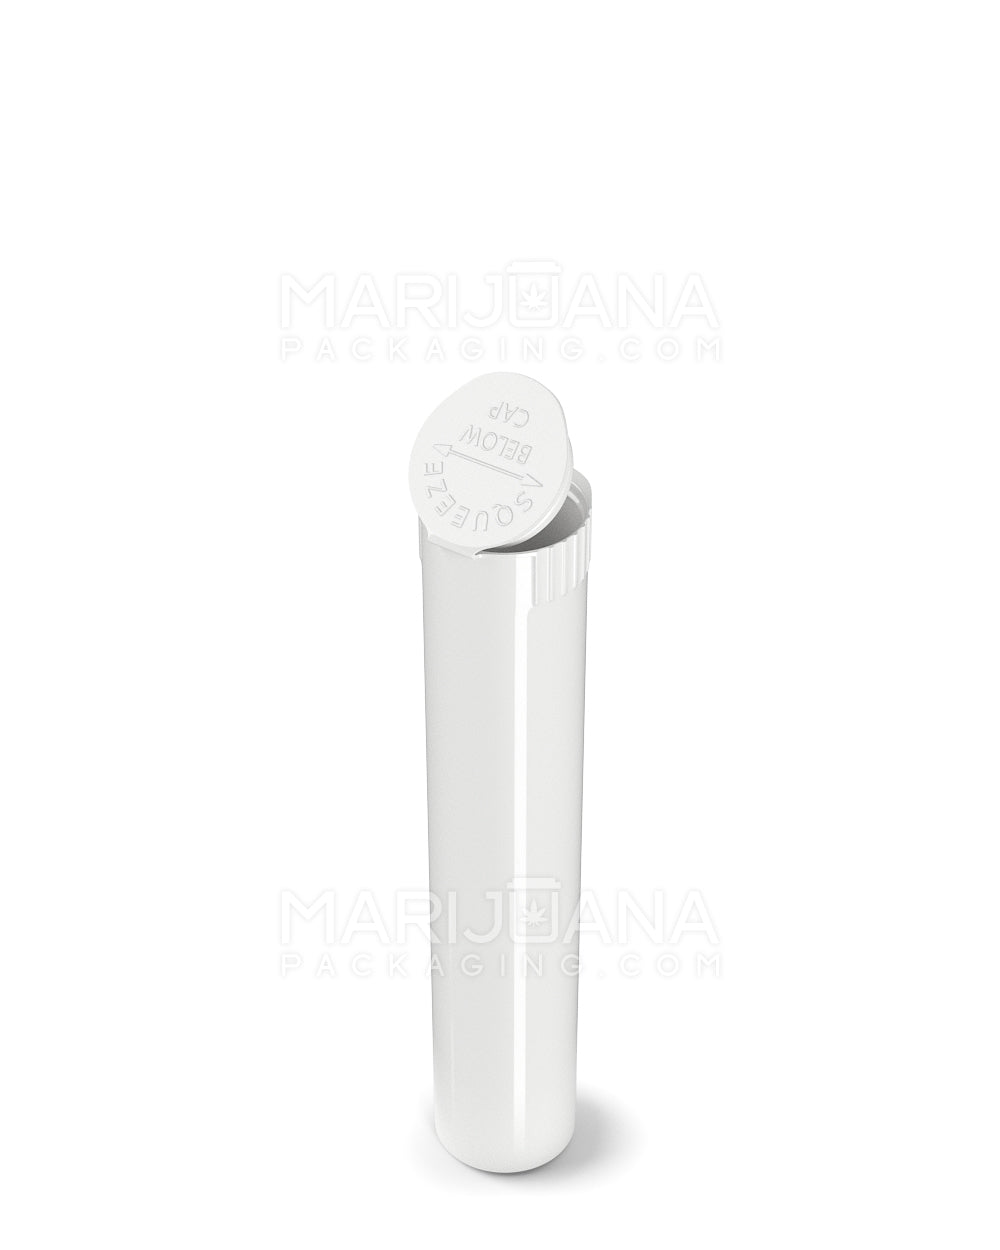 Child Resistant | Pop Top Opaque Plastic Pre-Roll Tubes | 98mm - White - 1000 Count - 3